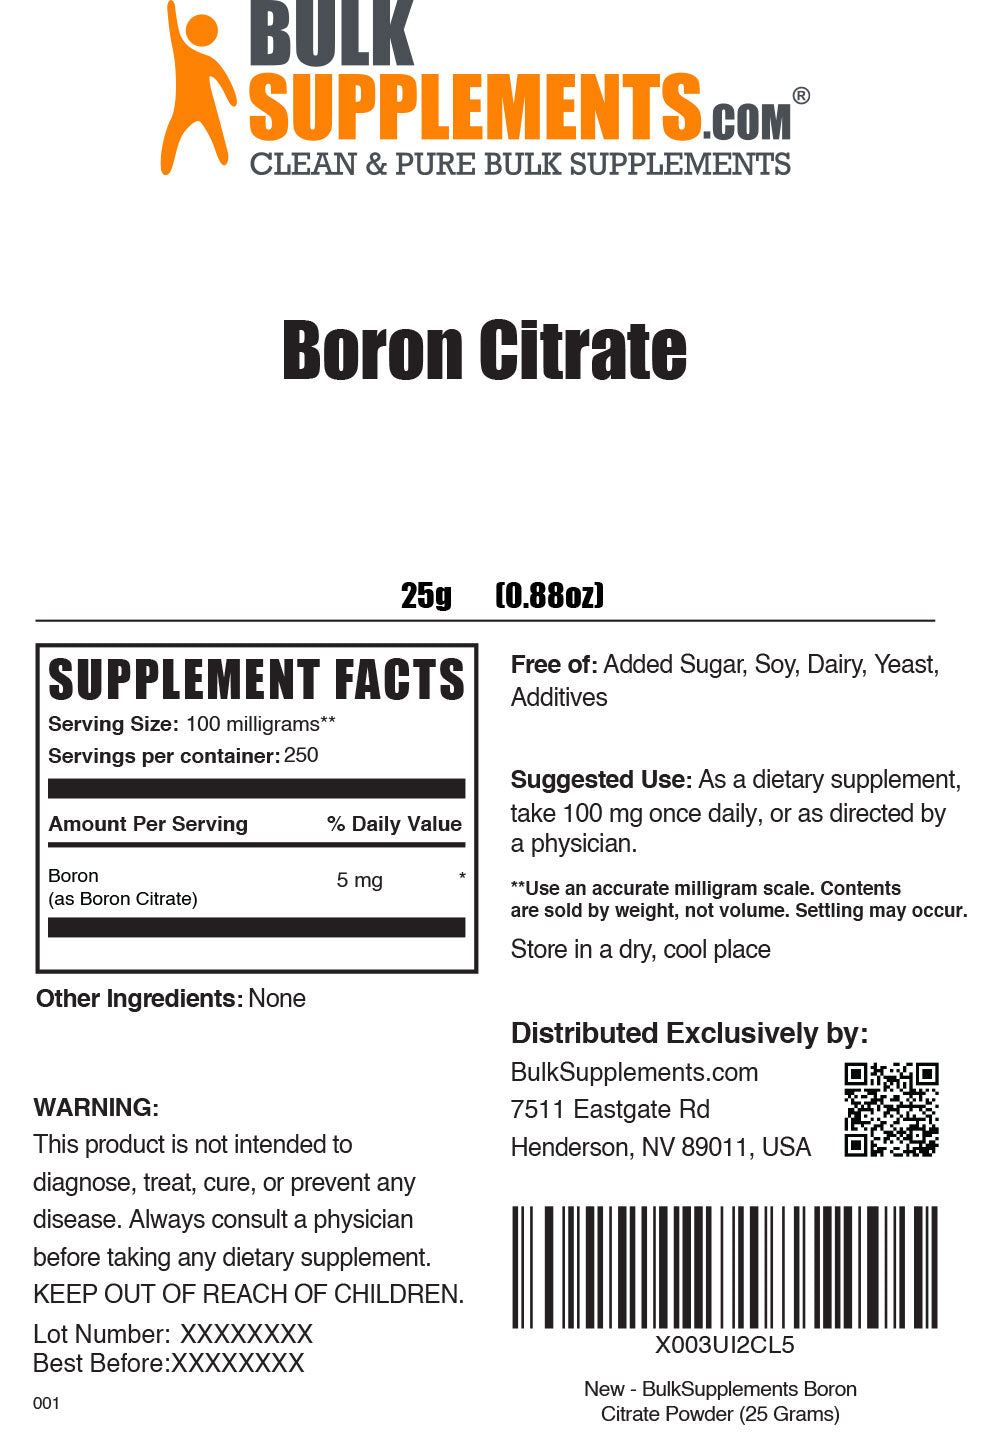 25g of Boron Citrate Supplement Facts